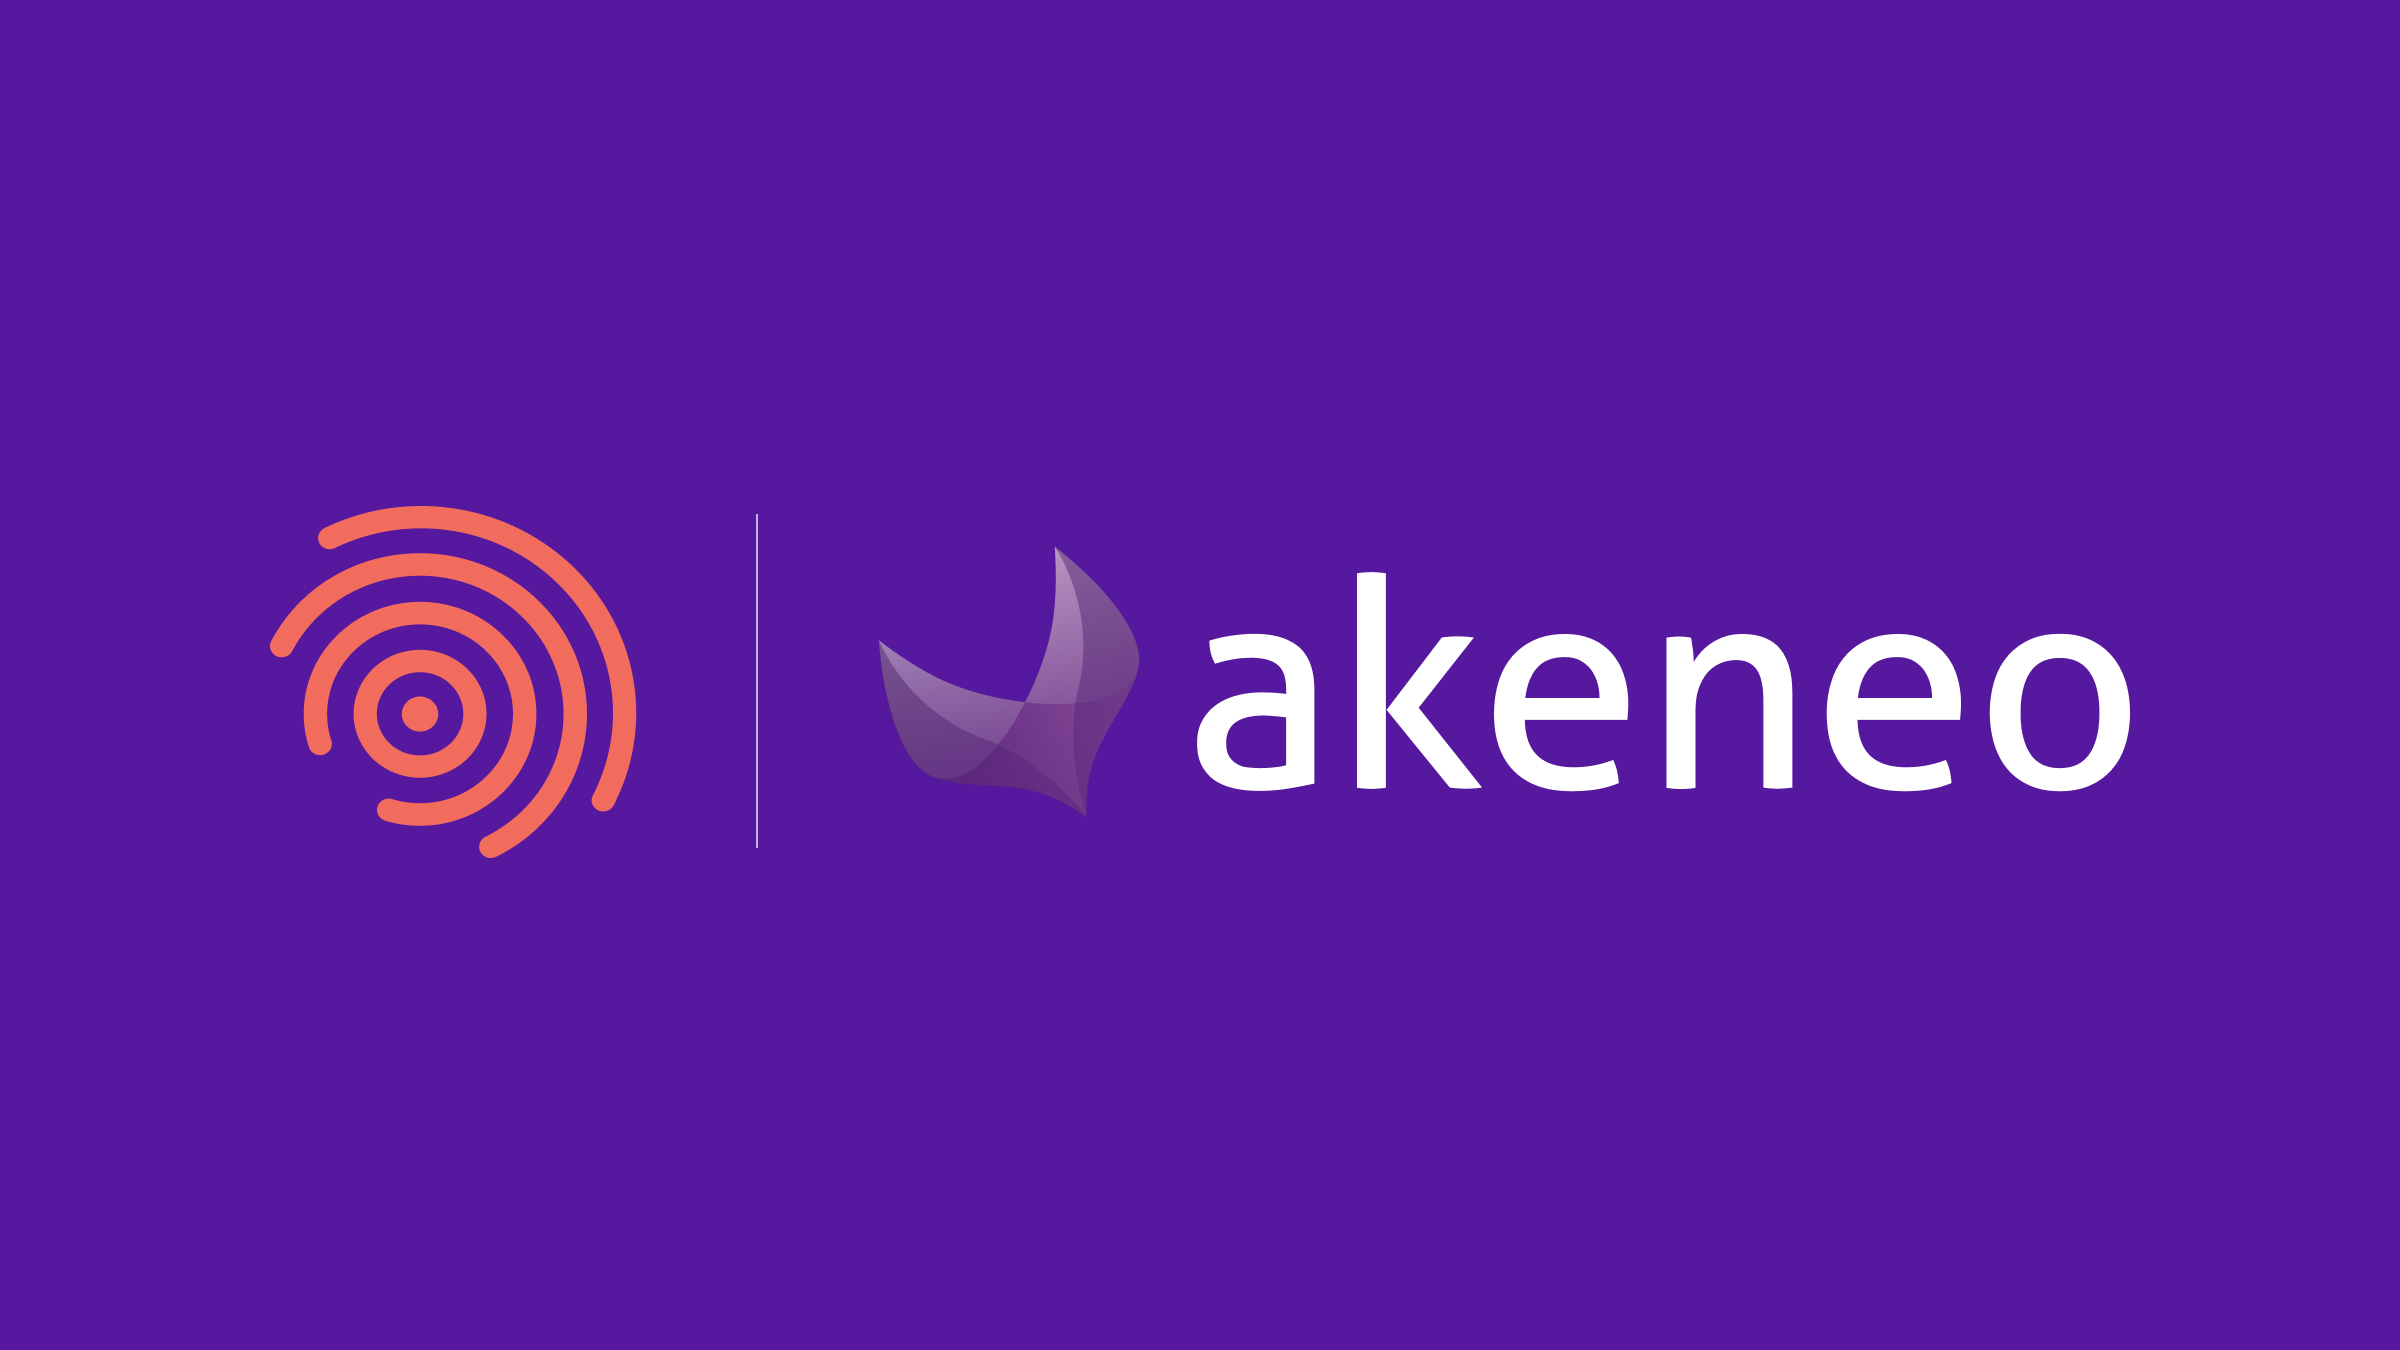 Smartling partners with Akeneo to automate the translation and localization of product information
